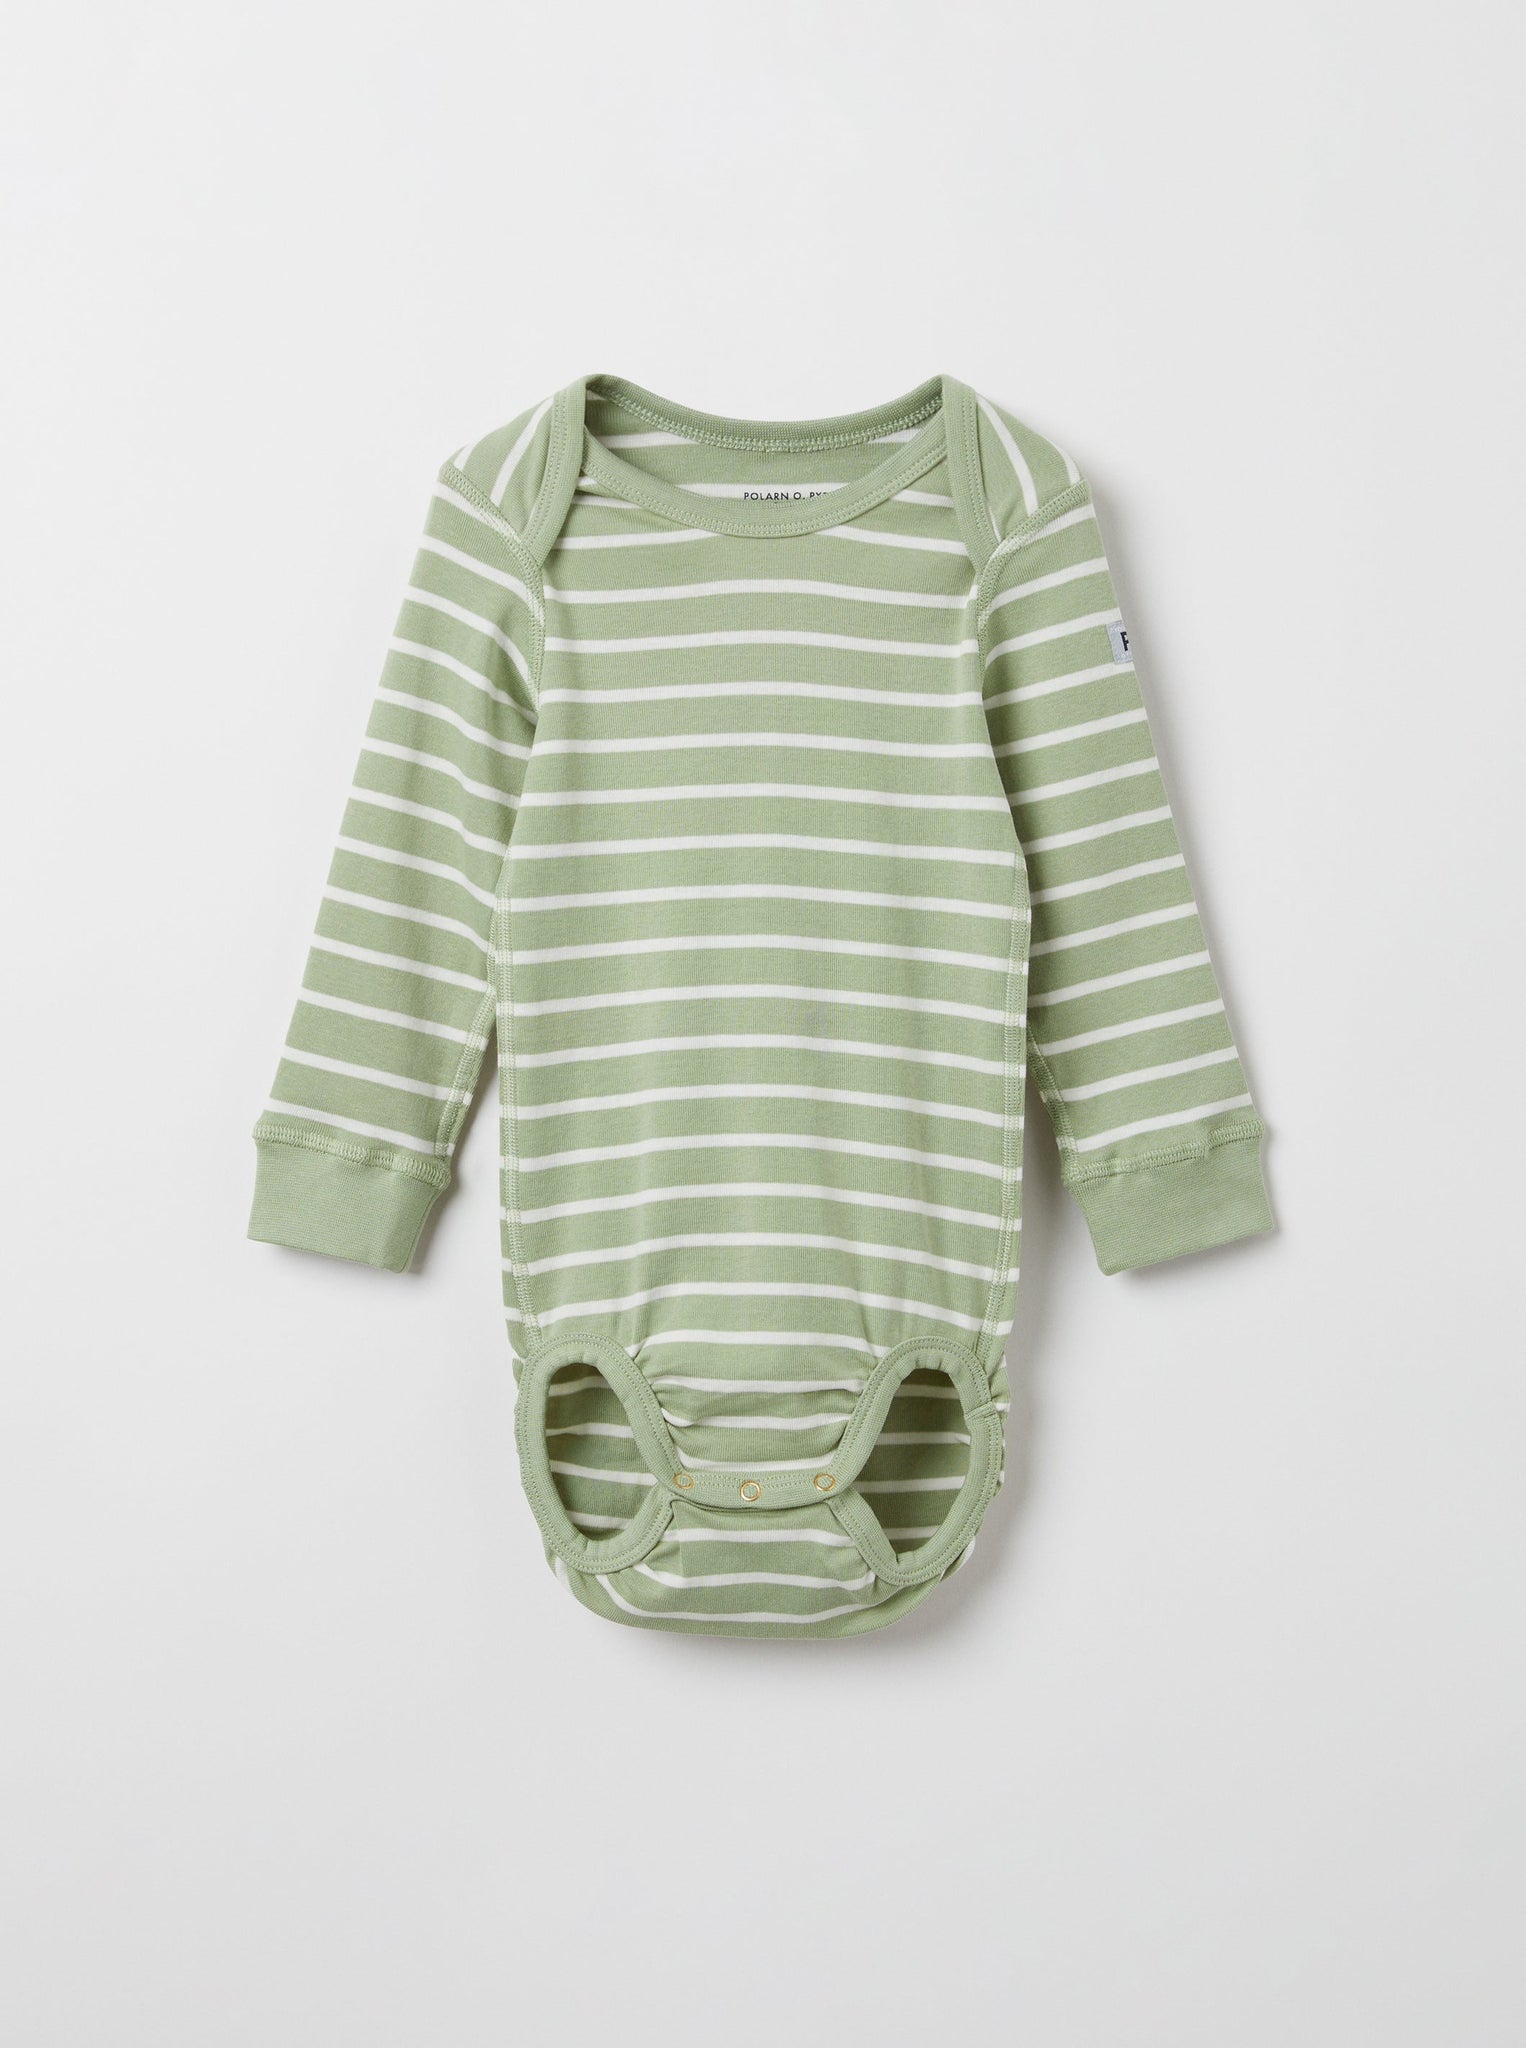 Striped Organic Cotton Green Babygrow from the Polarn O. Pyret babywear collection. Ethically produced baby clothing.